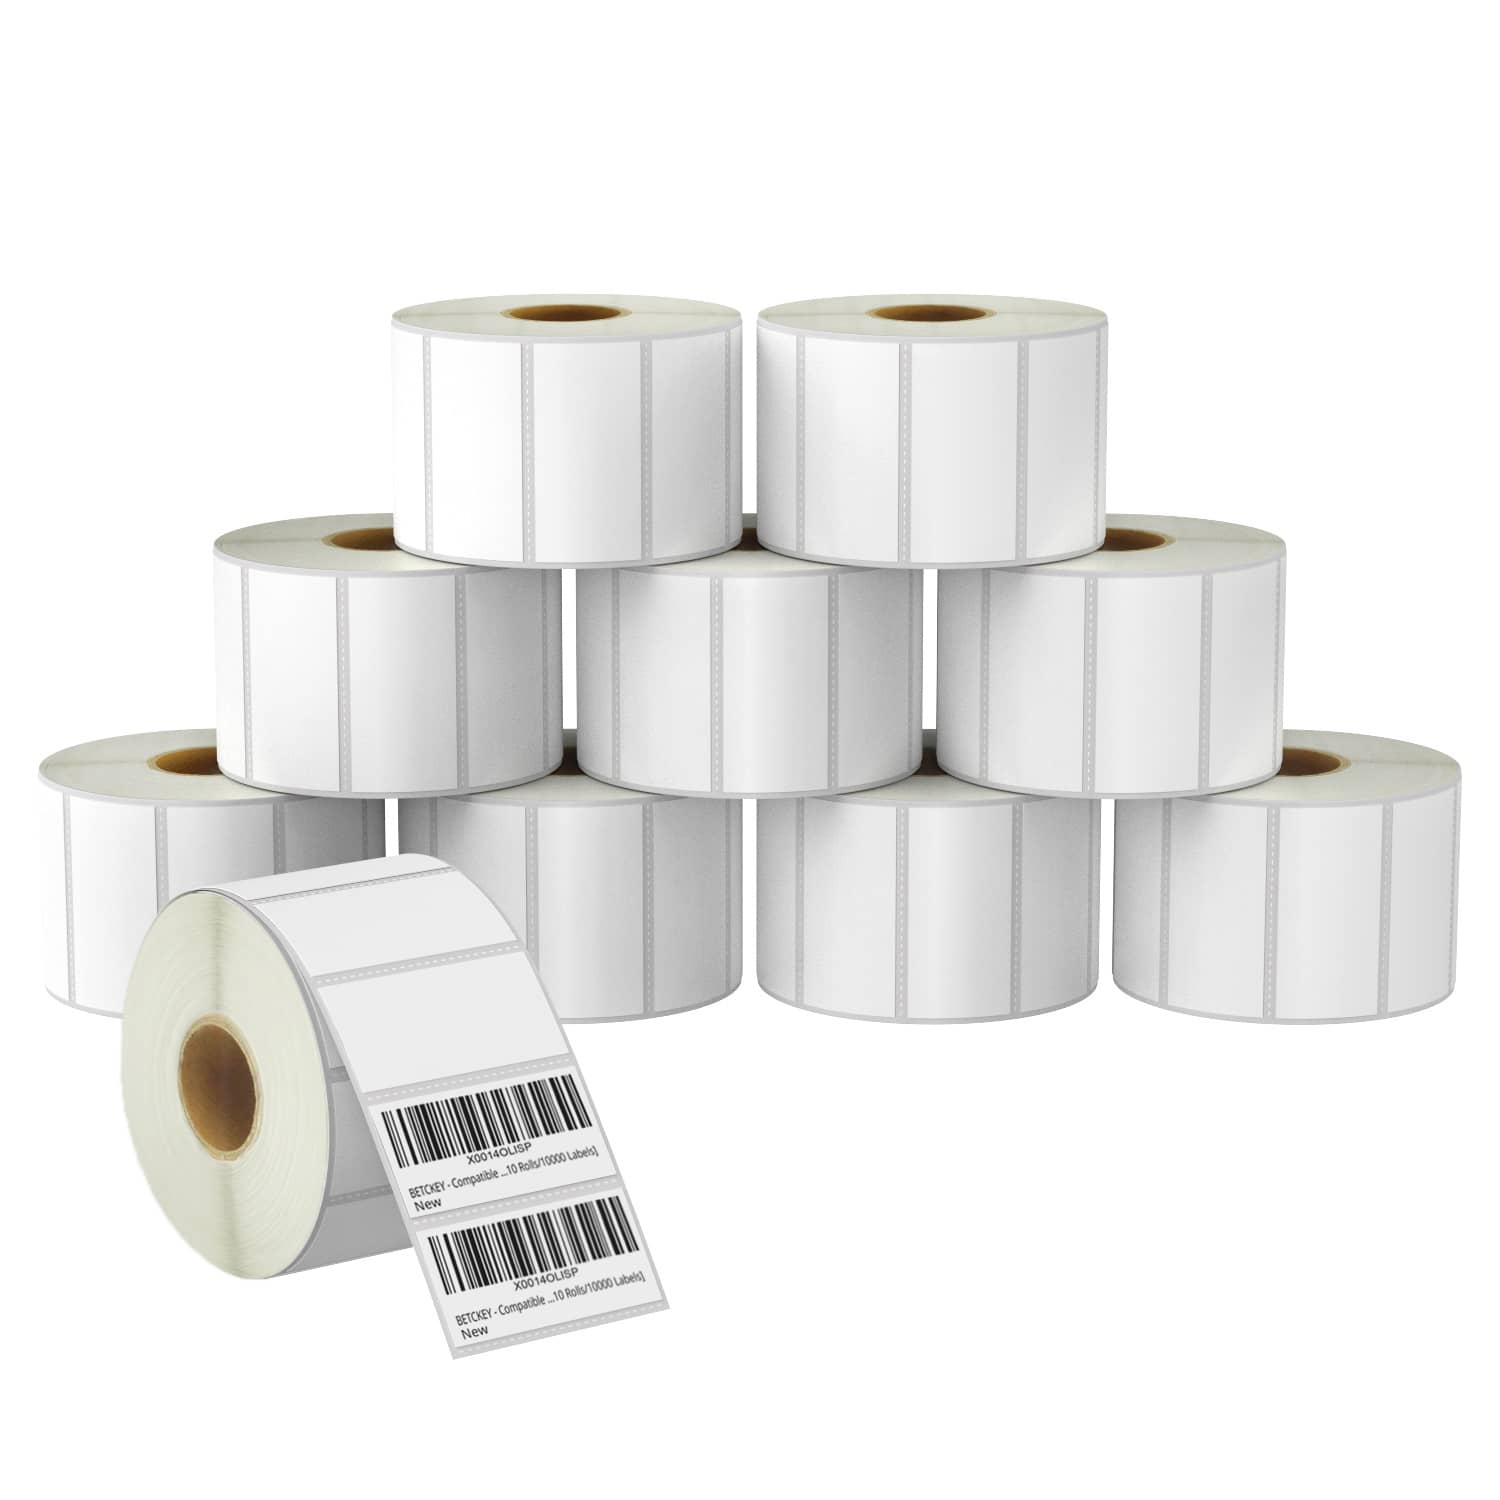 39.4 inch (1000mm) Double Coated Polyester 5.5 Mil - White PVC ,White[1 Roll], Size: 0.0000